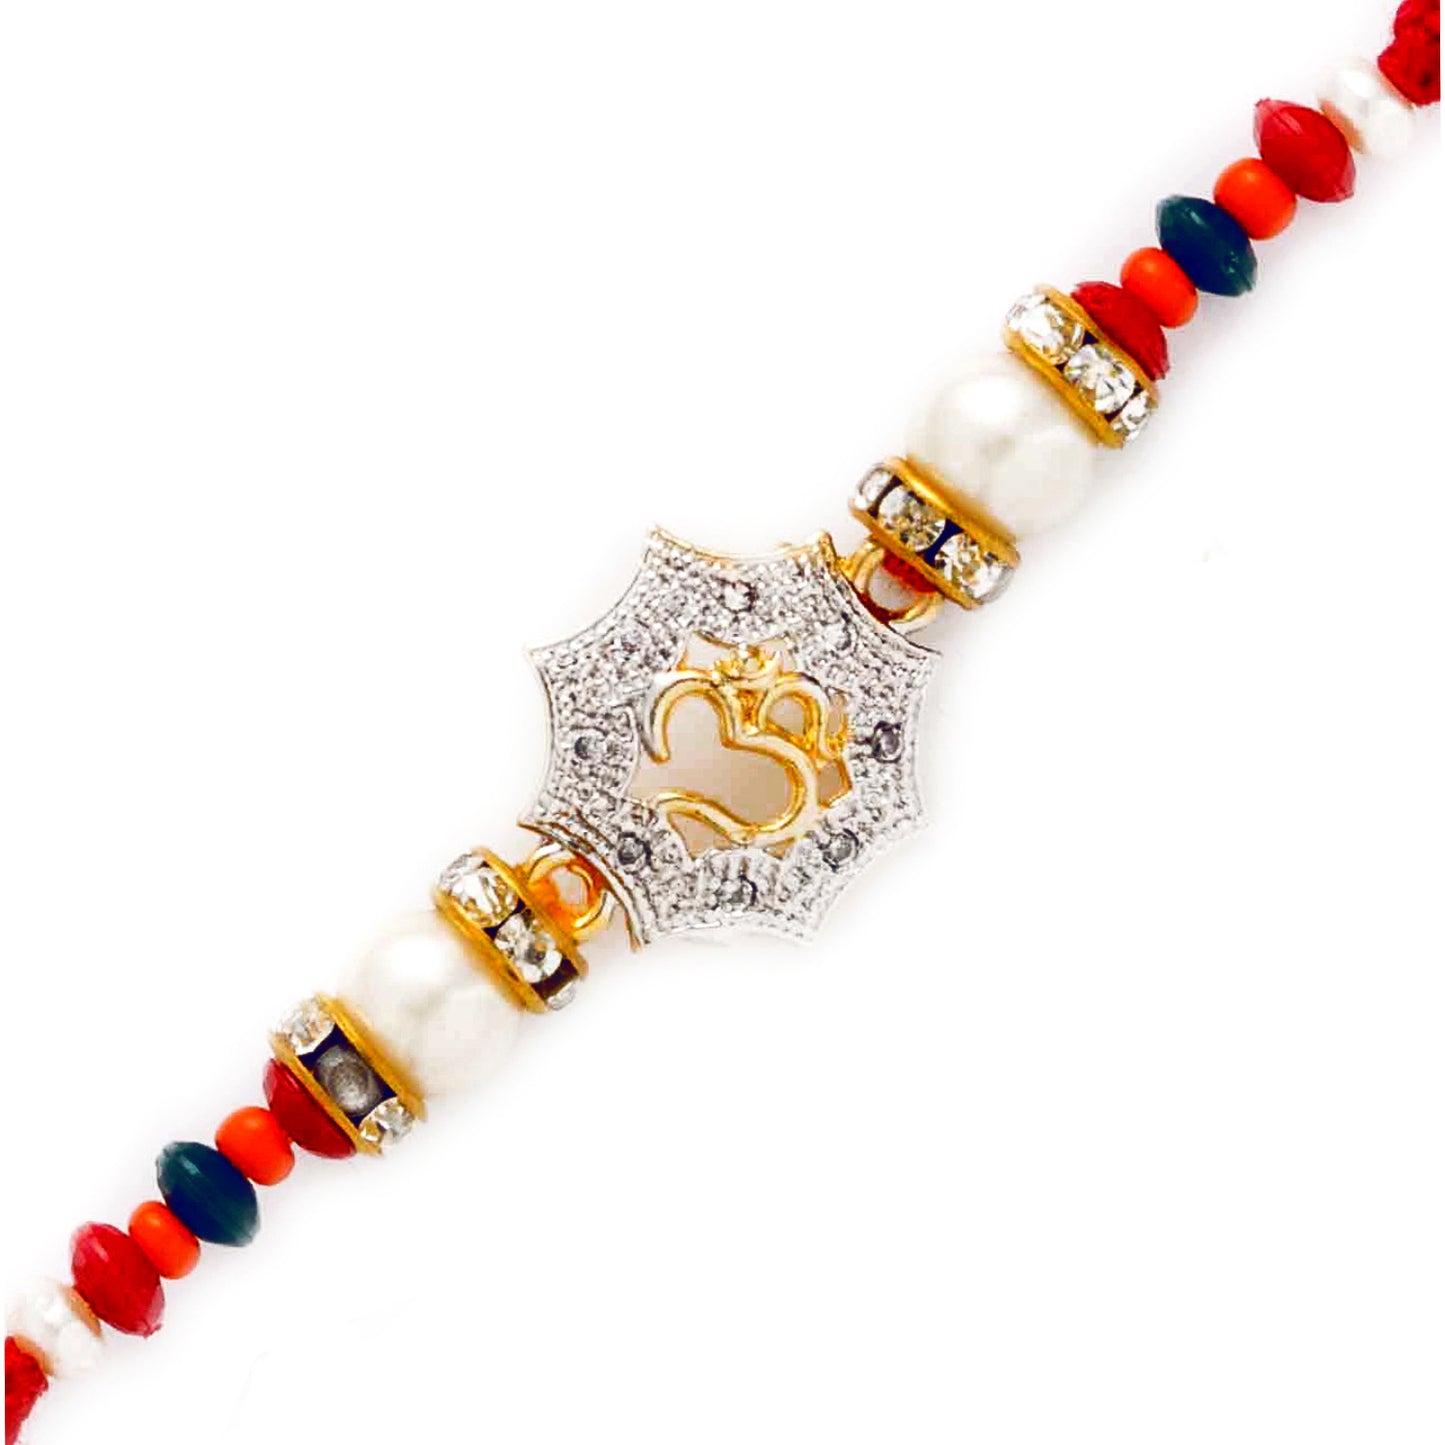 Aapno Rajasthan Colorful Rakhi with OM on AD Studded Poygon - Default Title (RJ17258)